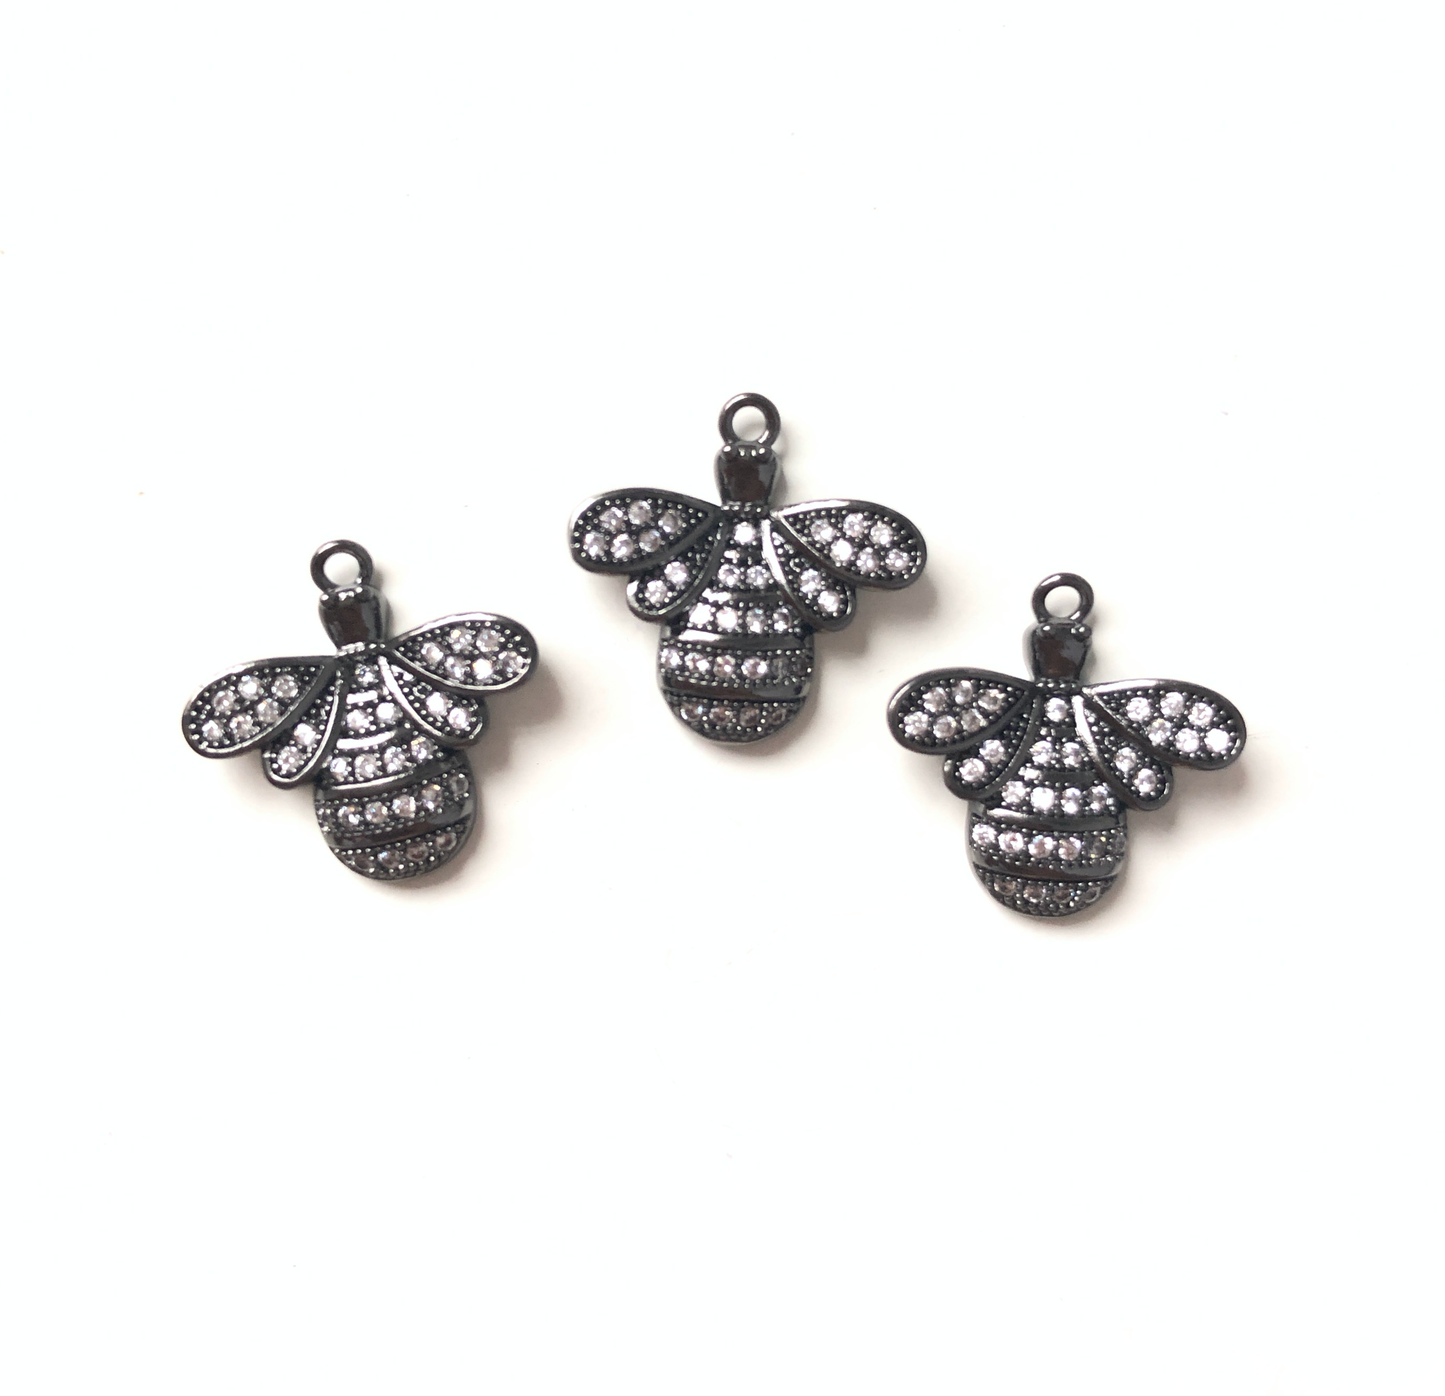 10pcs/lot 17*17mm CZ Paved Small Bee Charms Black CZ Paved Charms Animals & Insects Charms Beads Beyond